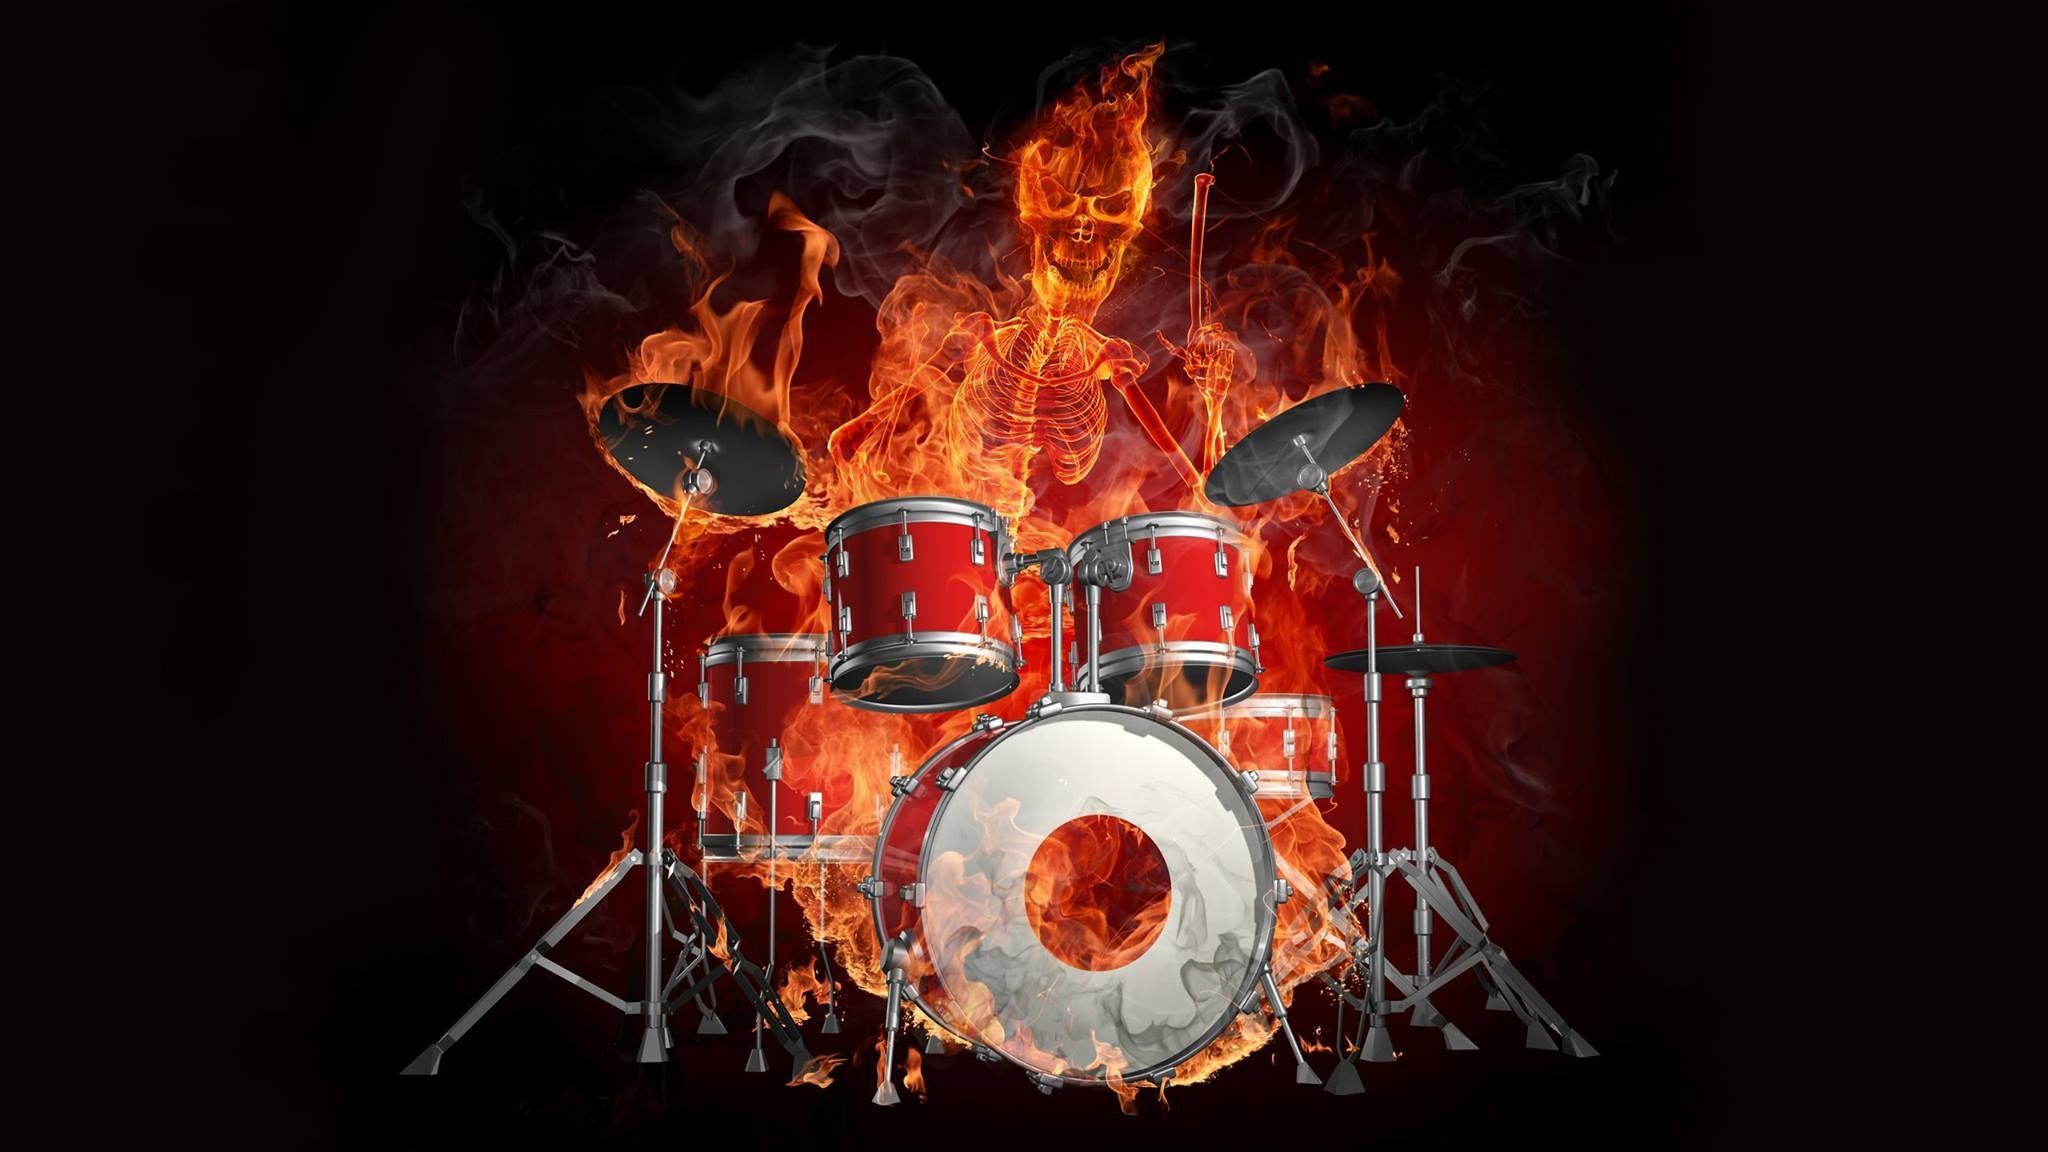 Drums From Hell - Drums Fire - HD Wallpaper 